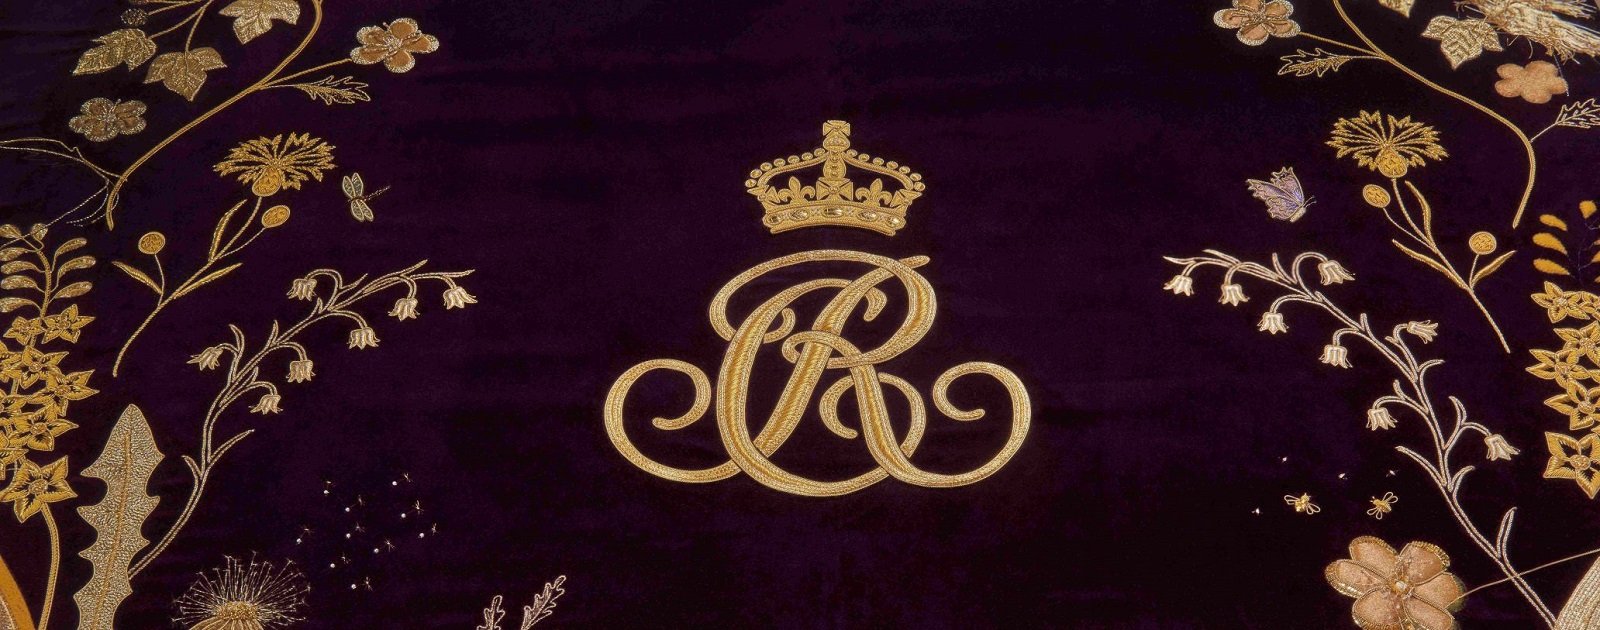 Her Majesty Queen Camilla's Robe of Estate worn for the Coronation 2023